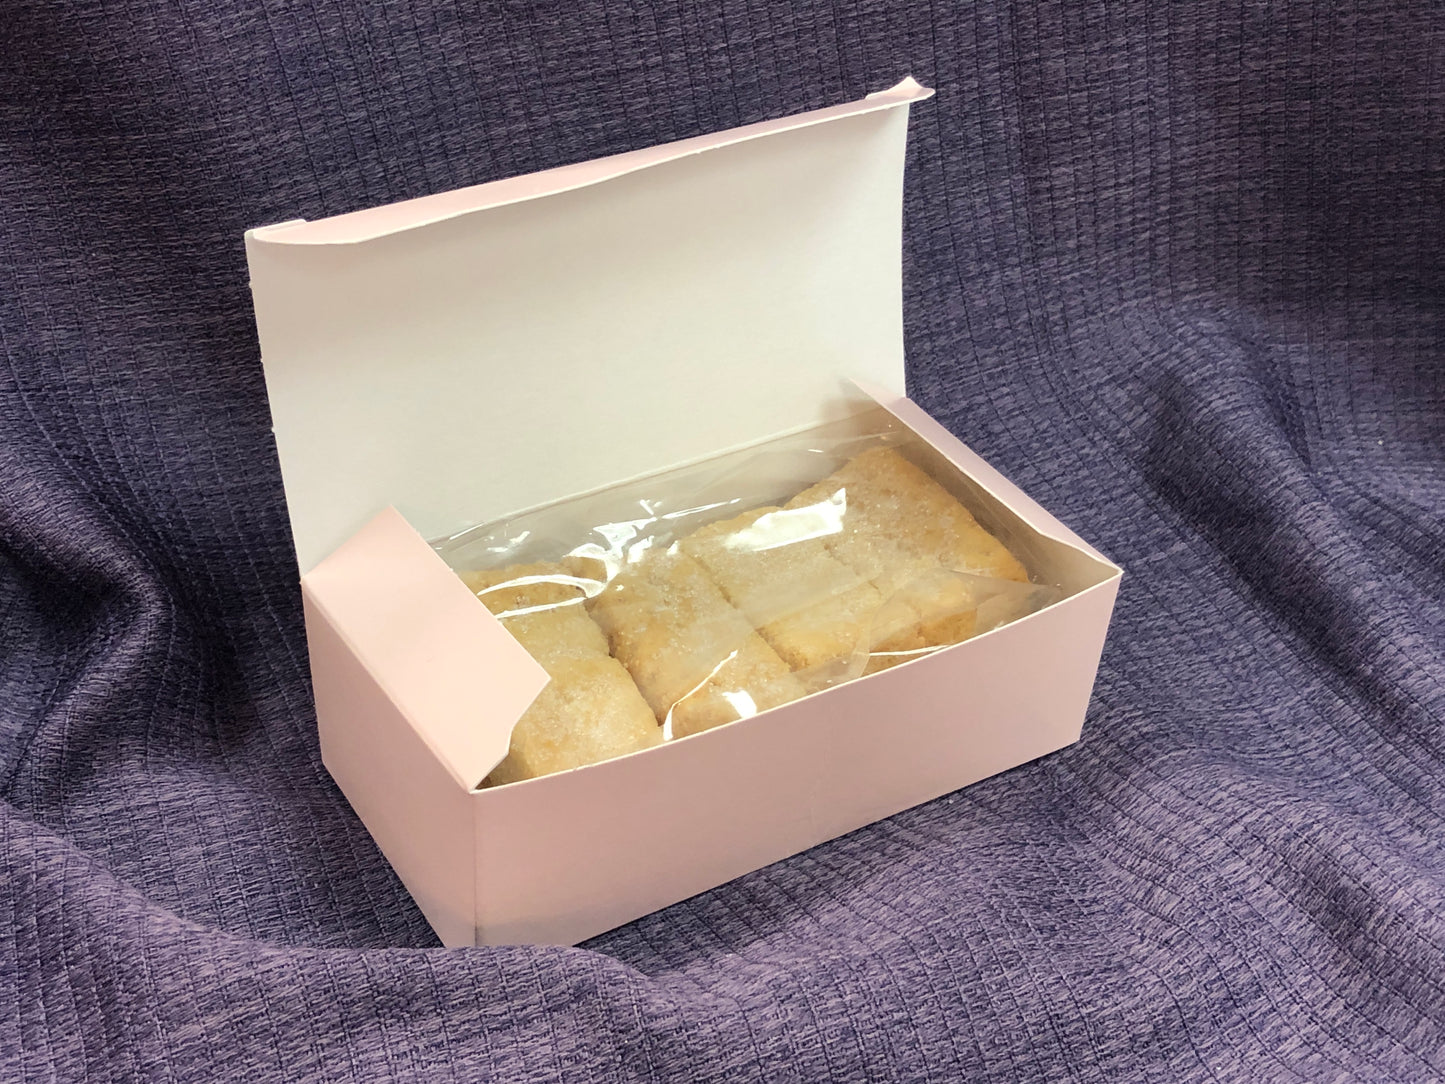 Biscuits with the Boss Gift Box